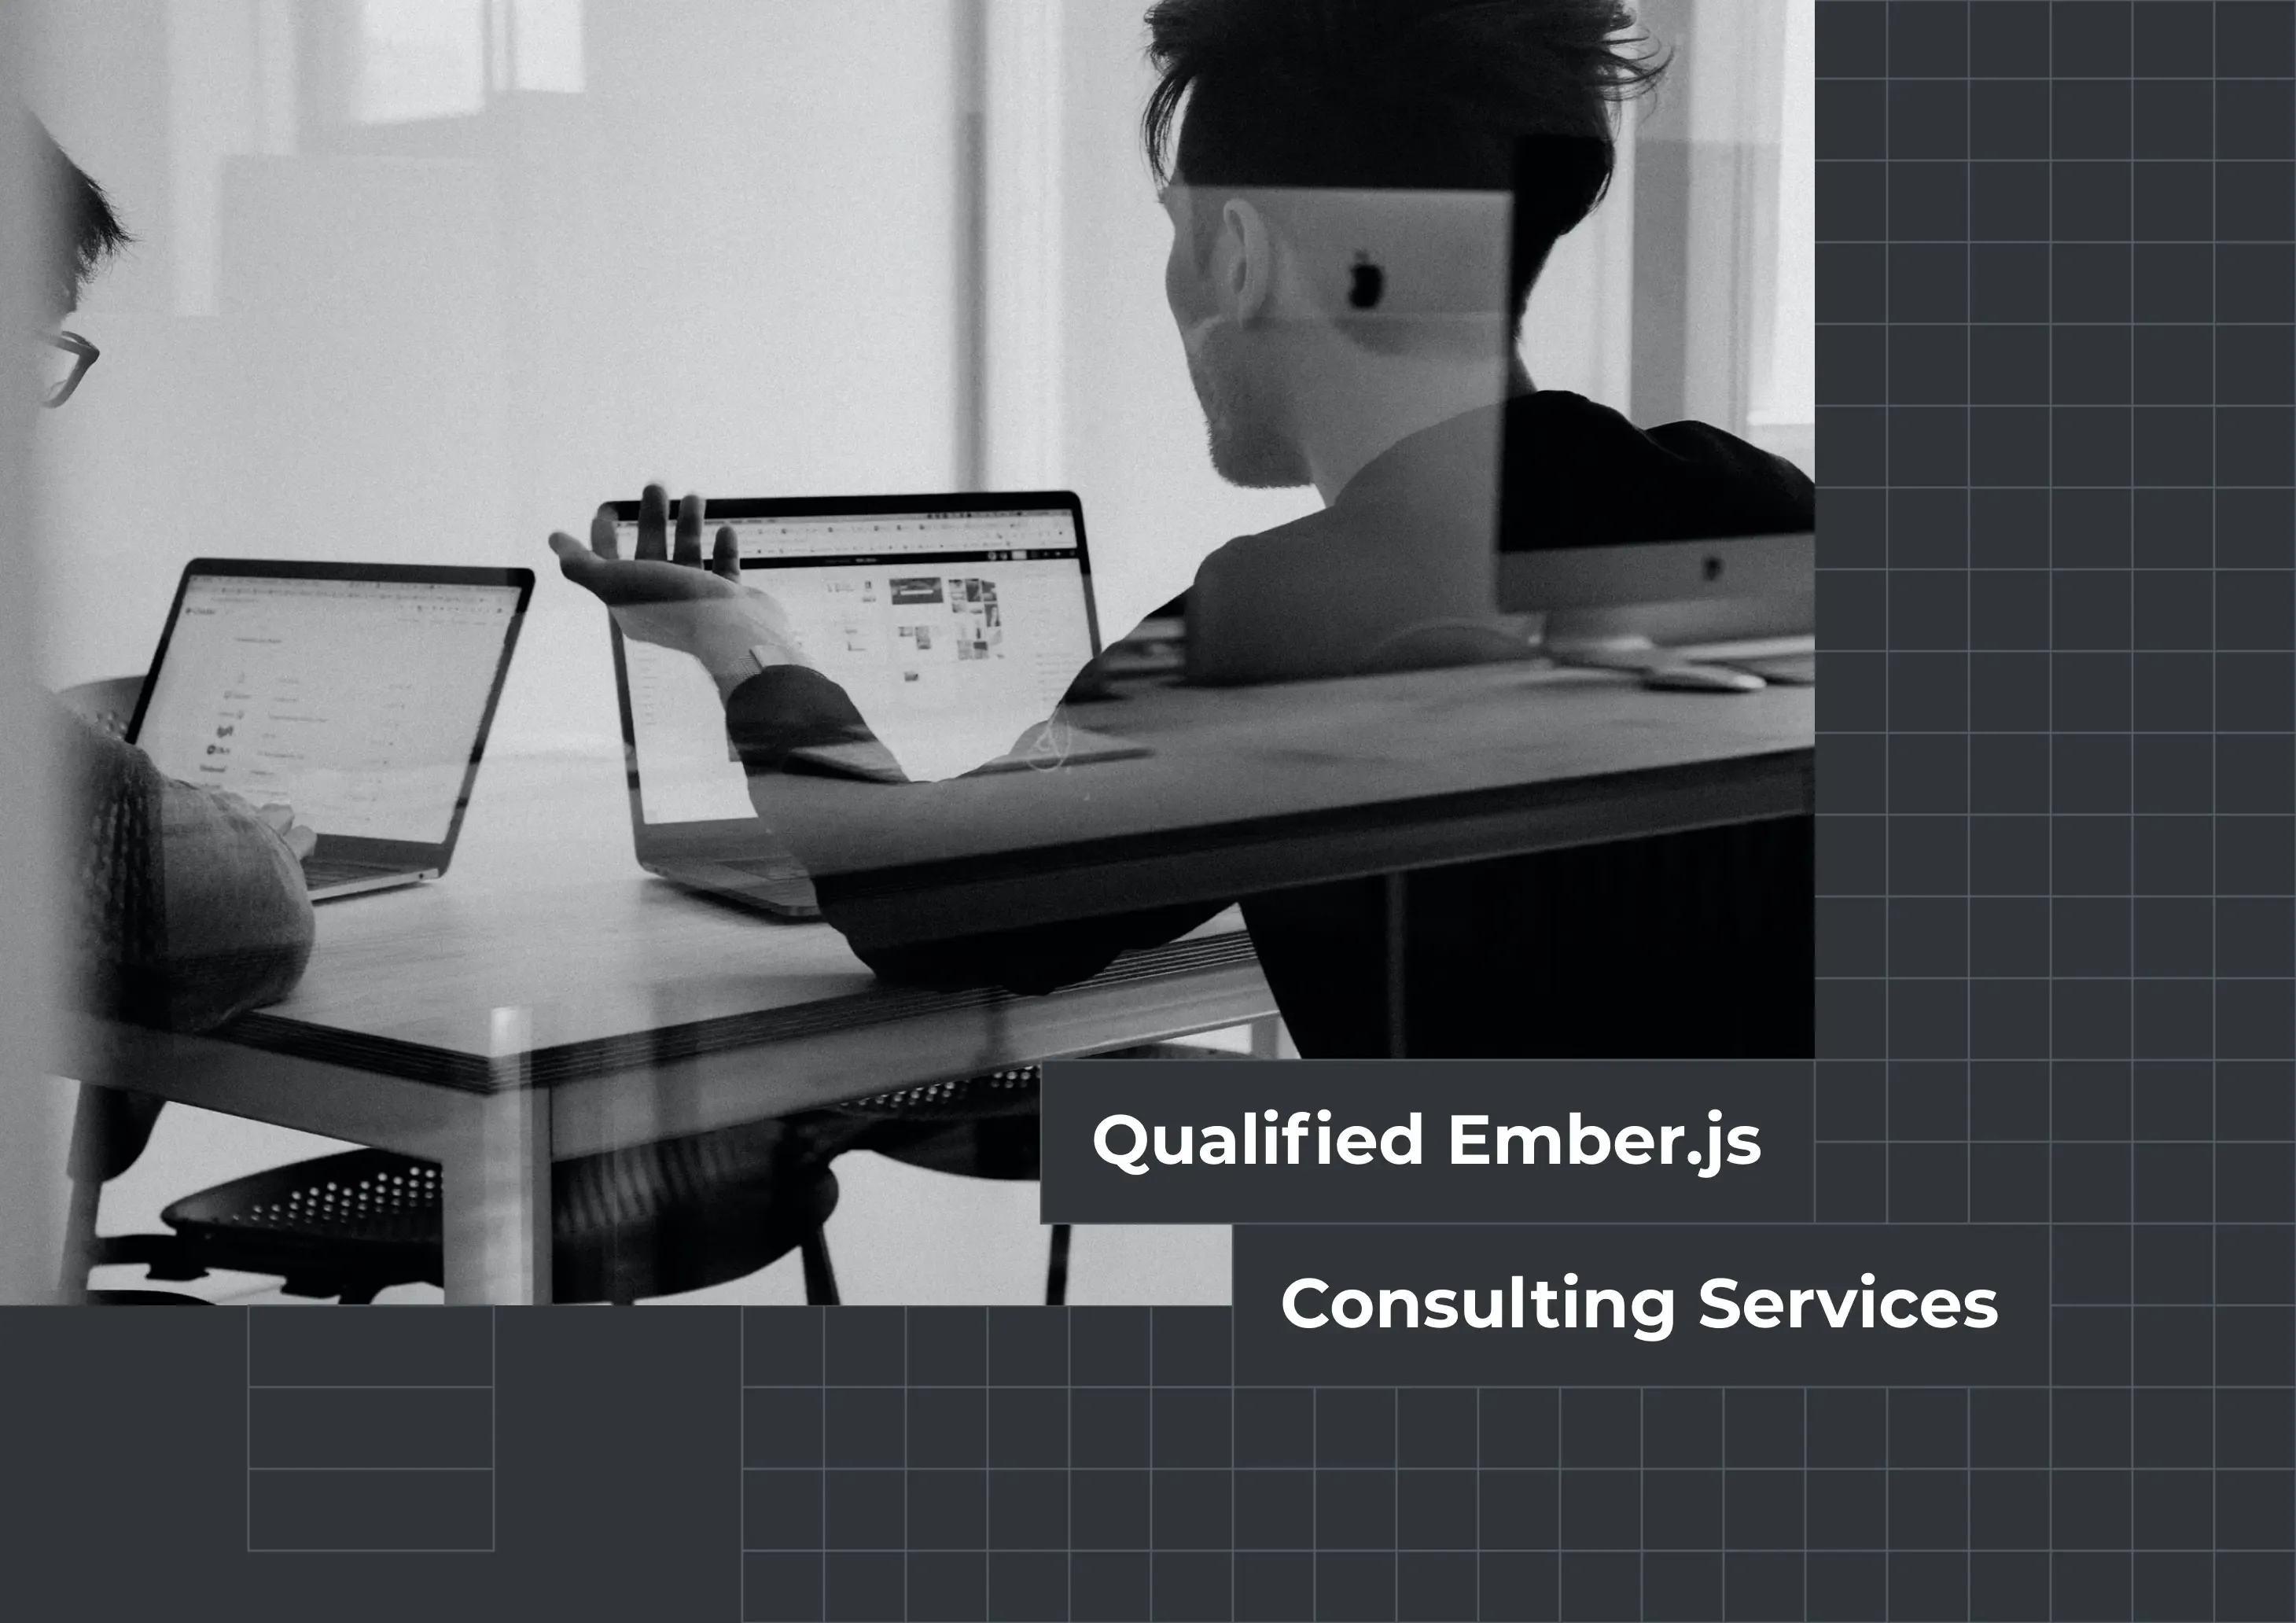 Qualified Ember.js Consulting Services